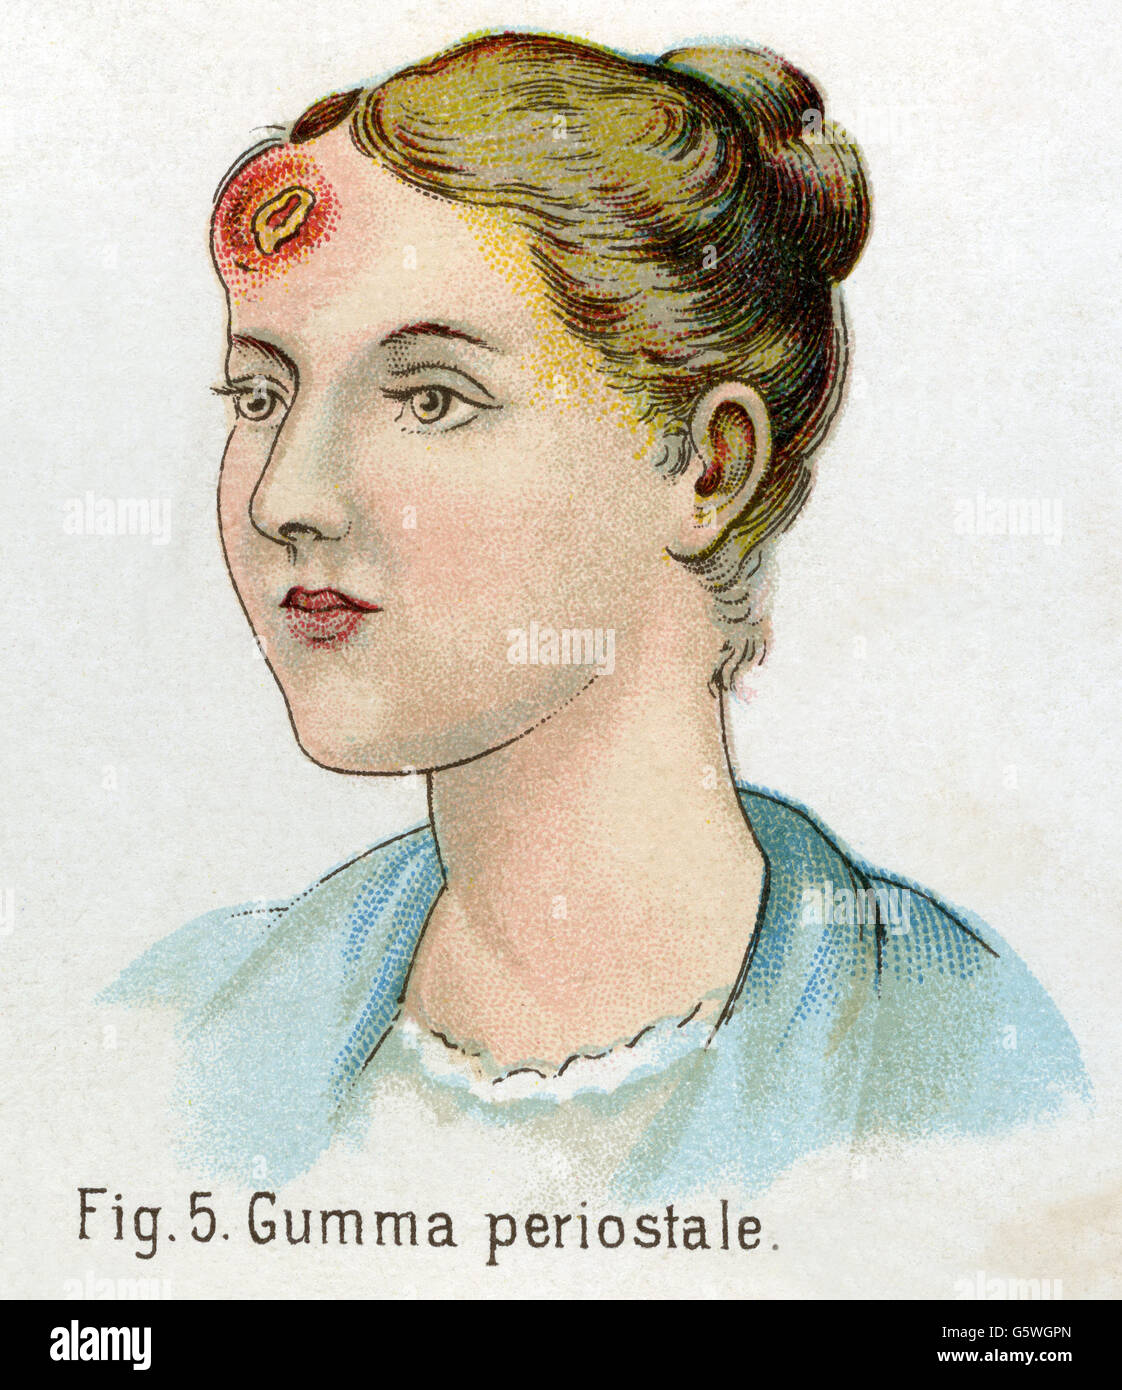 medicine, sexually transmitted diseases, syphilis, Gumma periostale, from: Friedrich Eduard Bilz, New Naturopathic Treatment, Leipzig, Germany, 1902, Additional-Rights-Clearences-Not Available Stock Photo